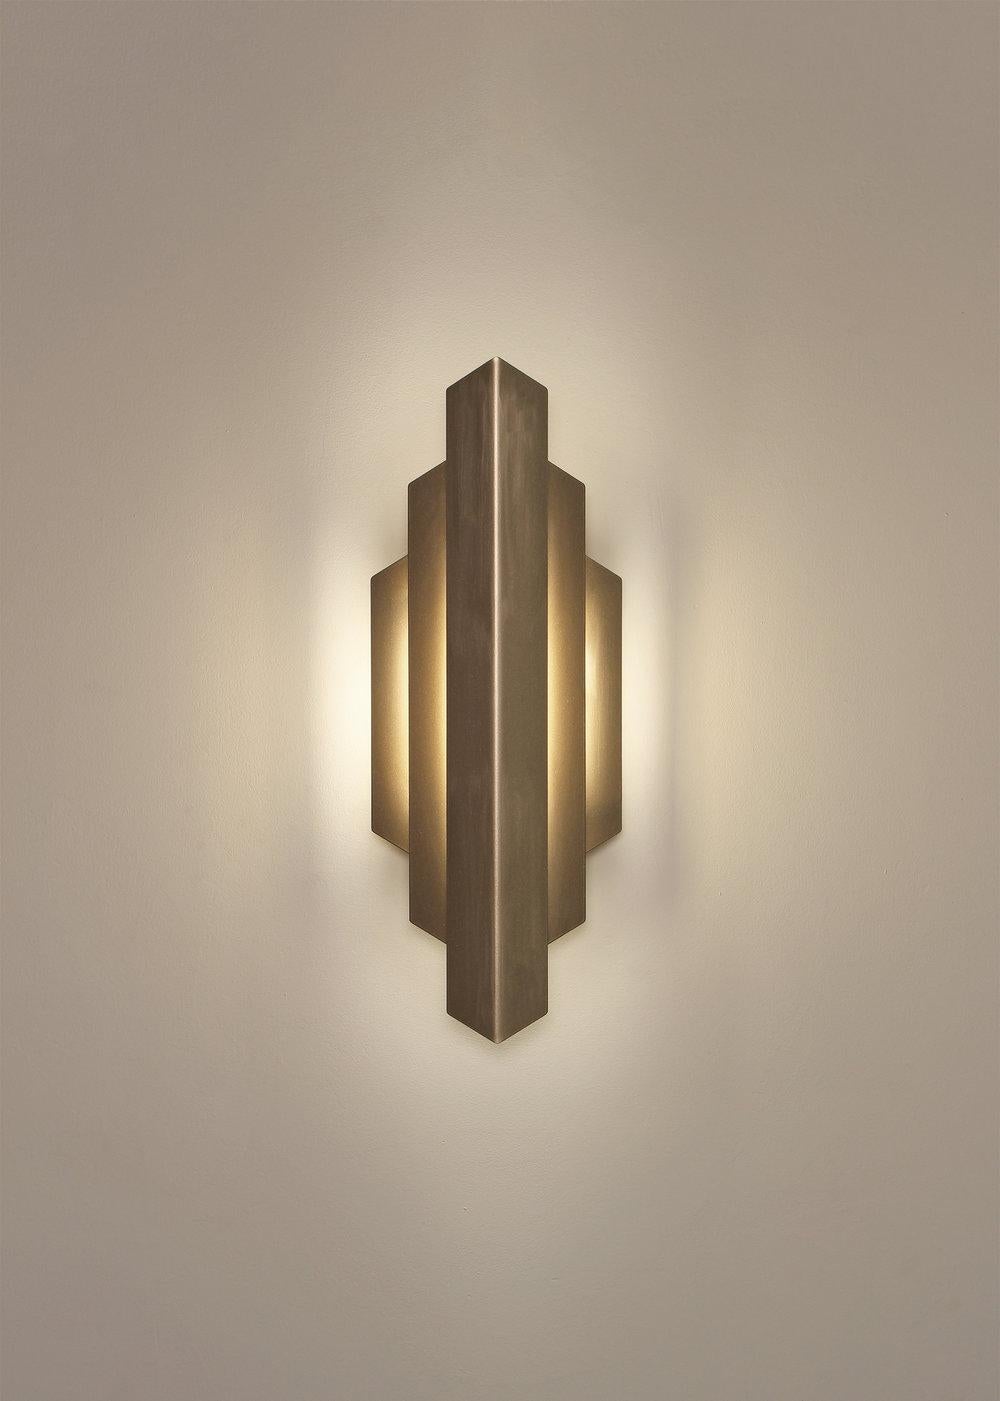 Deco sconce washes the wall with a gentle glow of indirect light. Its striking form was inspired by the bold, geometric lines that defined the Art Deco movement. Deco sconce provides a soft, accent illumination for a hallway or feature